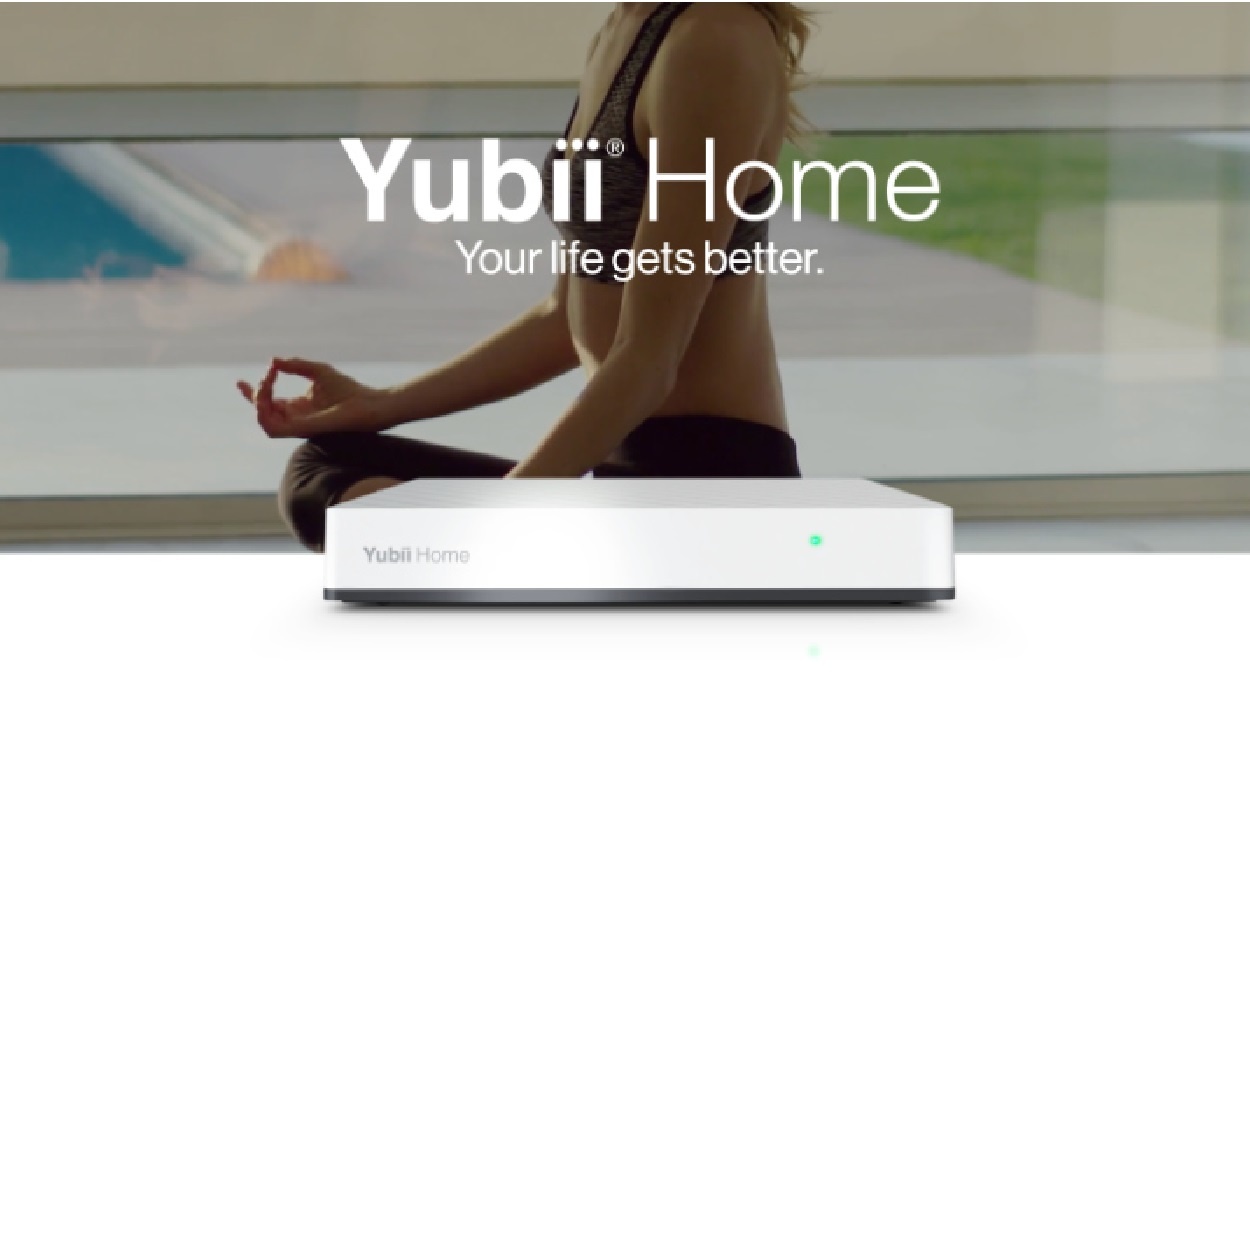 Yubii Home - Your Live get Better